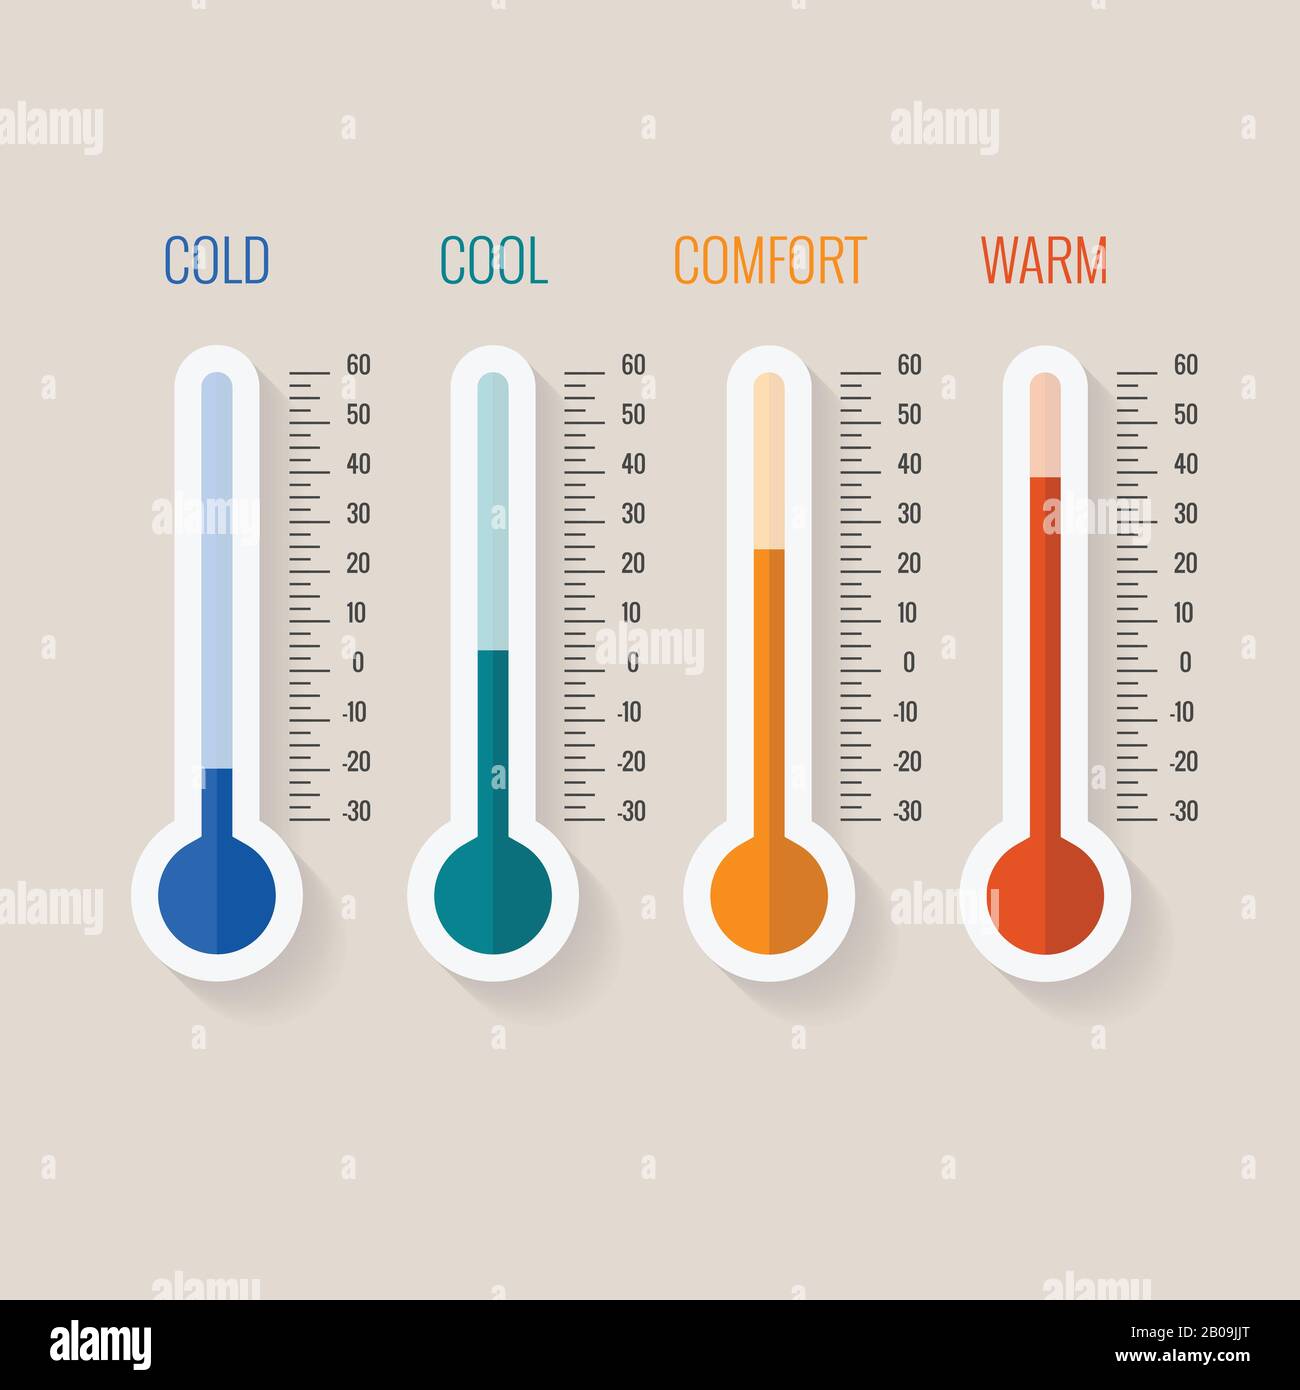 https://c8.alamy.com/comp/2B09JJT/temperature-measurement-from-cold-to-hot-thermometer-gauges-set-vector-illustration-temperature-thermometer-comfortable-2B09JJT.jpg